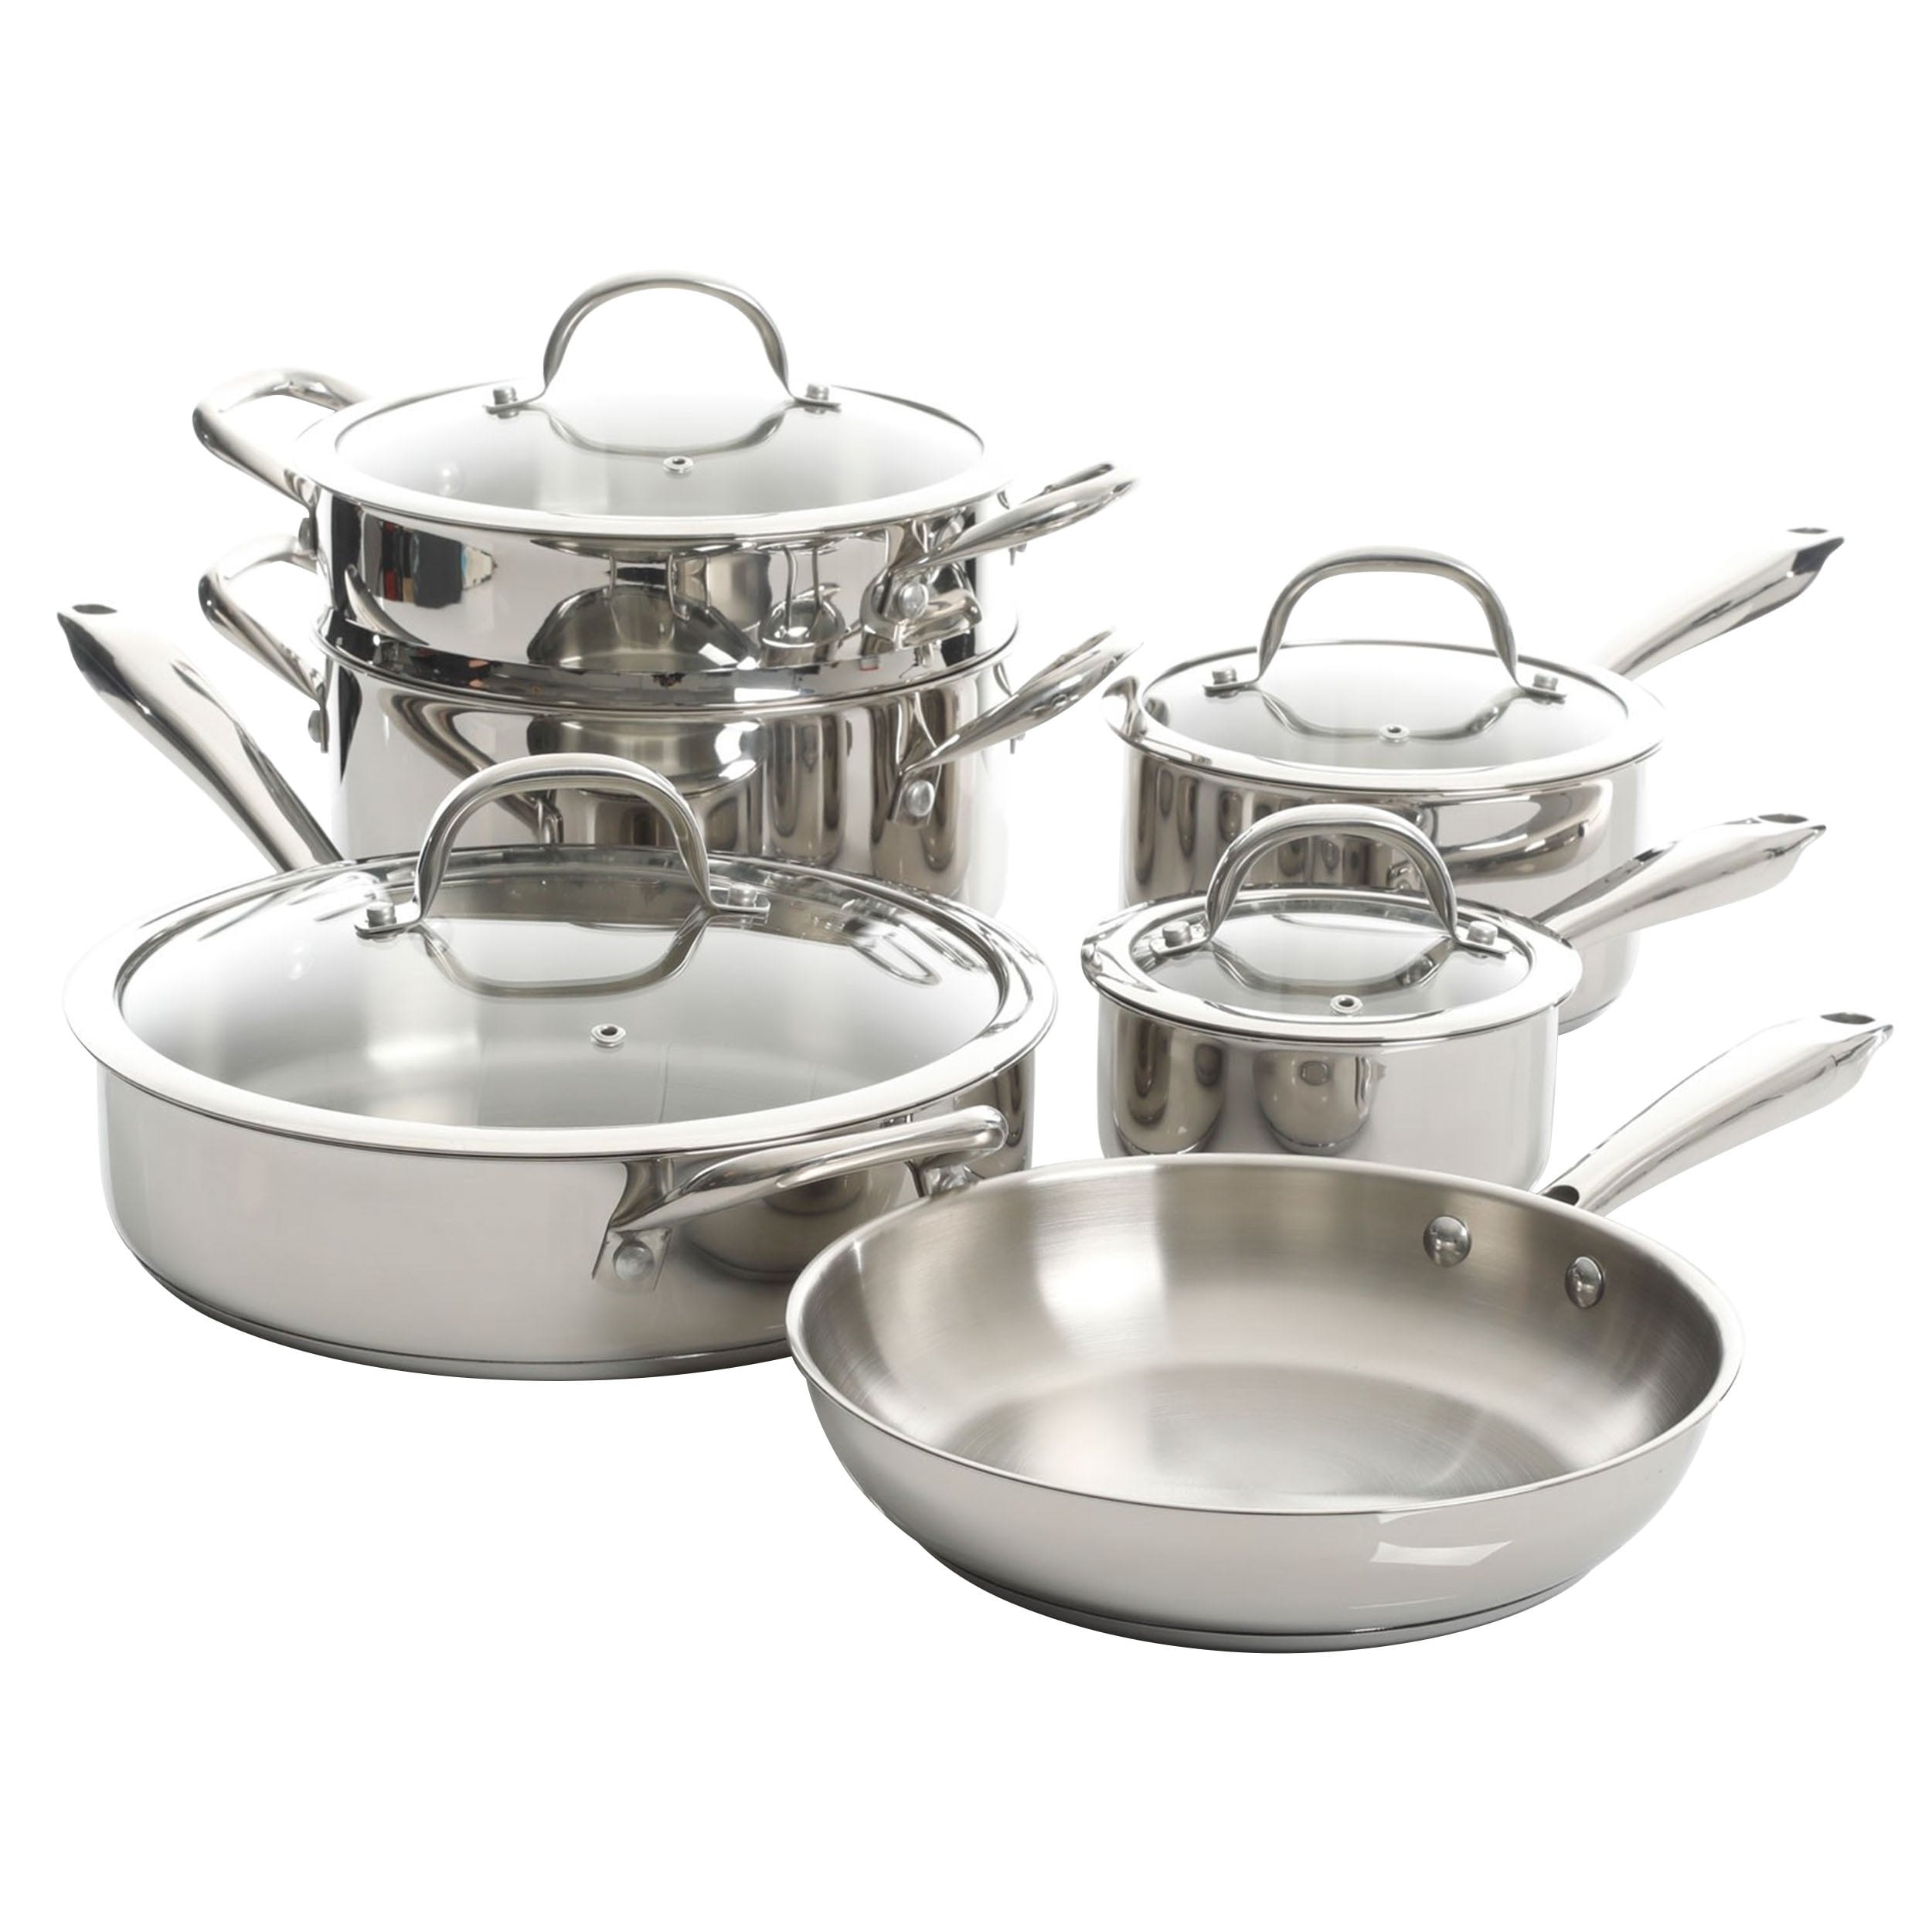 https://ak1.ostkcdn.com/images/products/is/images/direct/223e8cd24d375e0a5afe86362bf51ef4882d7062/Heavy-Duty-Stainless-Steel-Cookware-10-Piece-Set.jpg